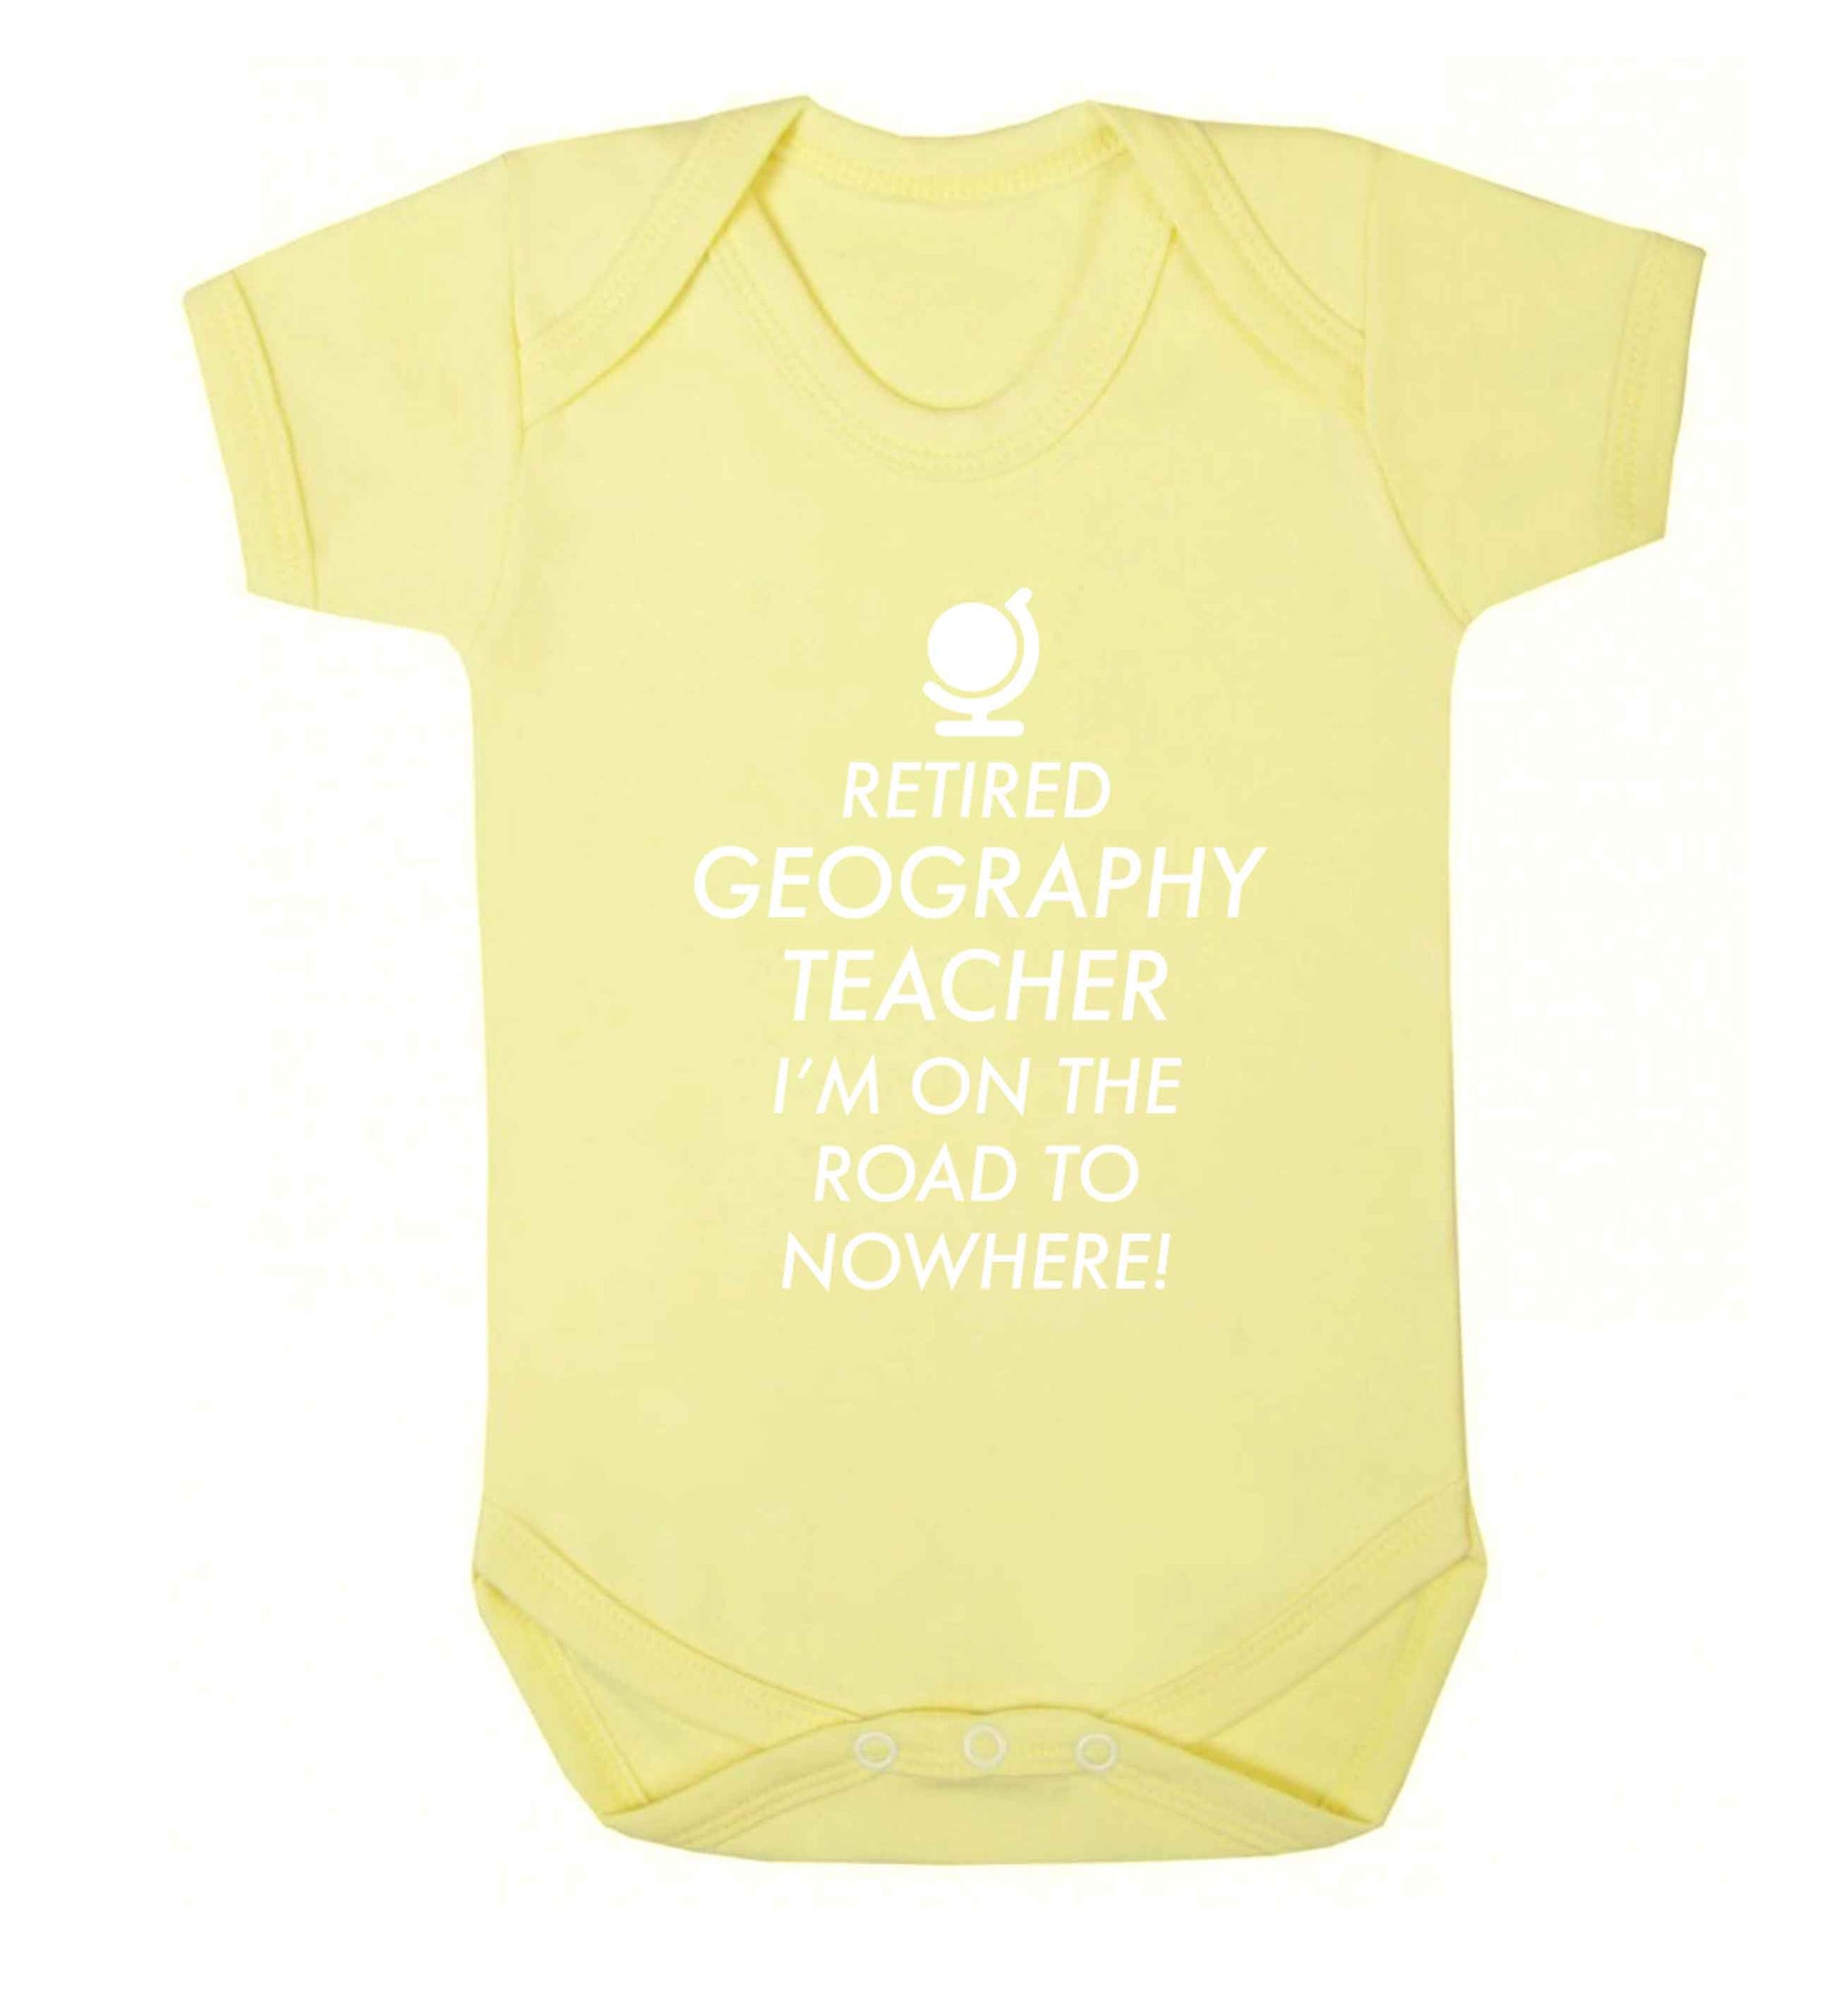 Retired geography teacher I'm on the road to nowhere Baby Vest pale yellow 18-24 months